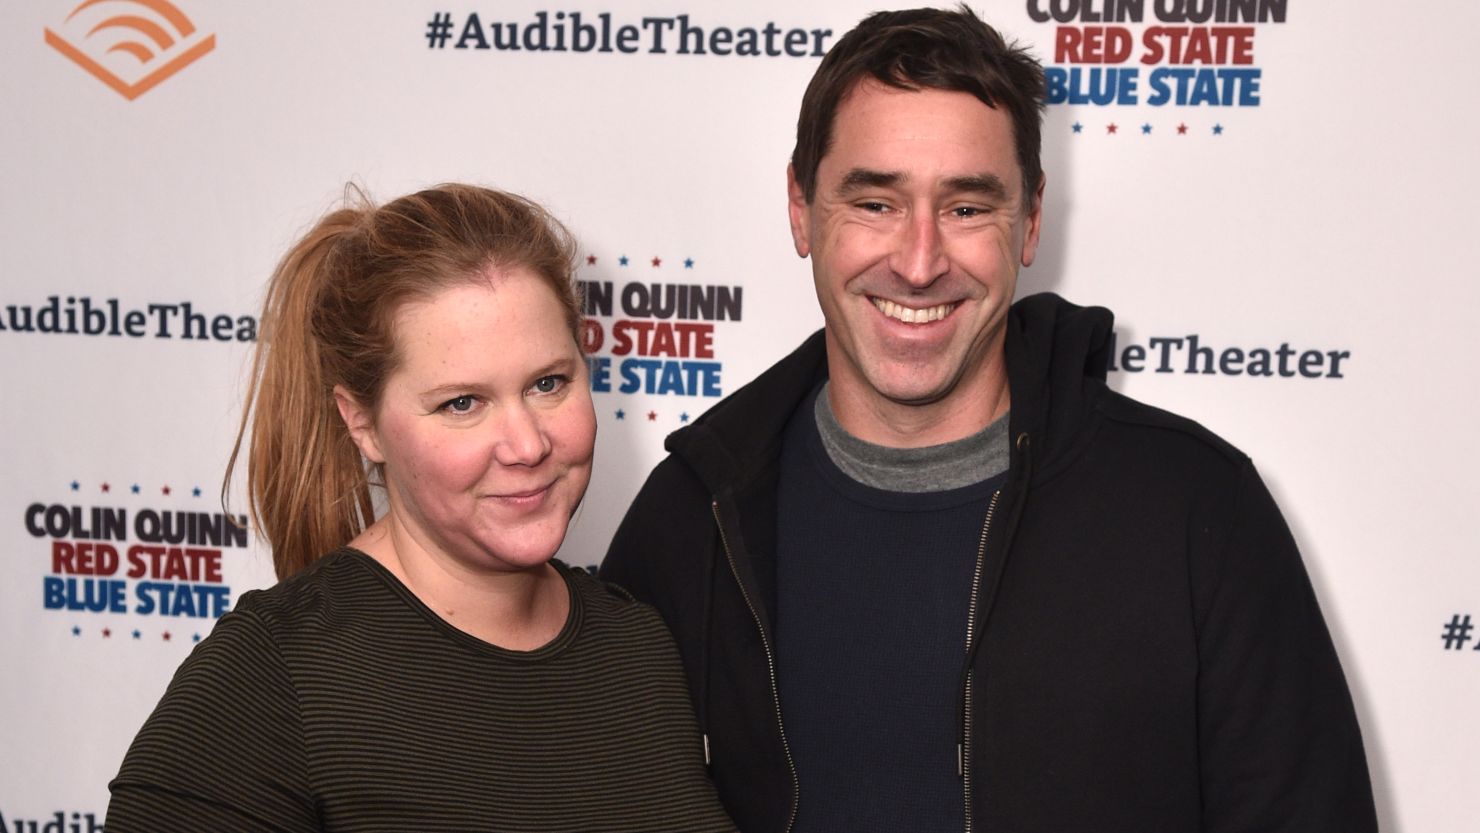 Amy Schumer and Chris Fischer at opening night for Colin Quinn's "Red State Blue State" in New York City on January 22, 2019.